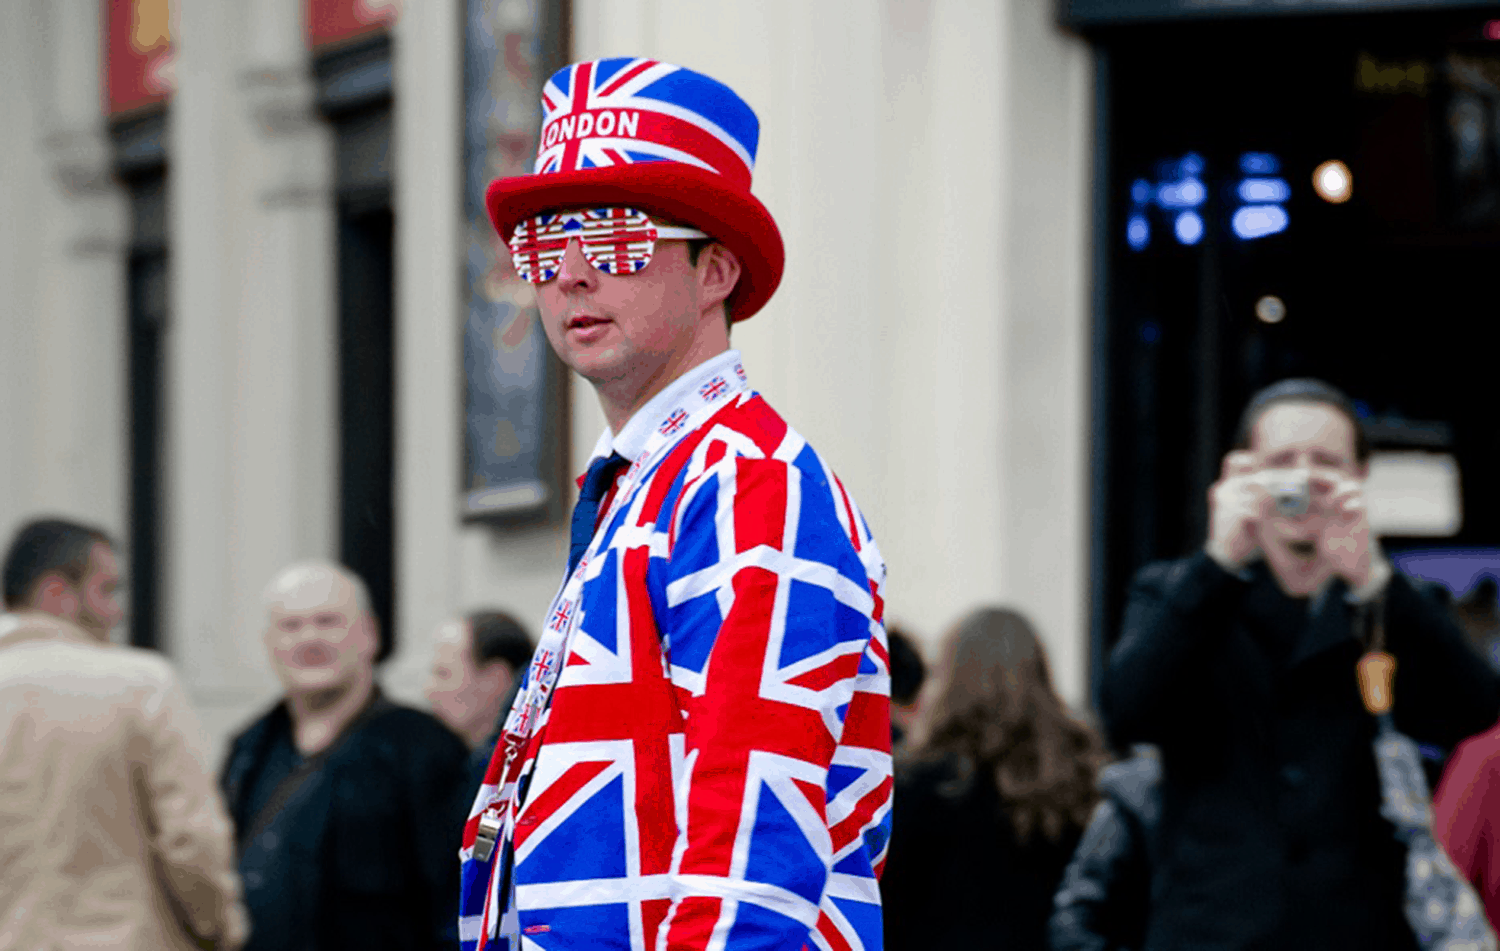 ‘It takes guts’: Brexiteer praised for admitting this wasn’t the outcome he voted for